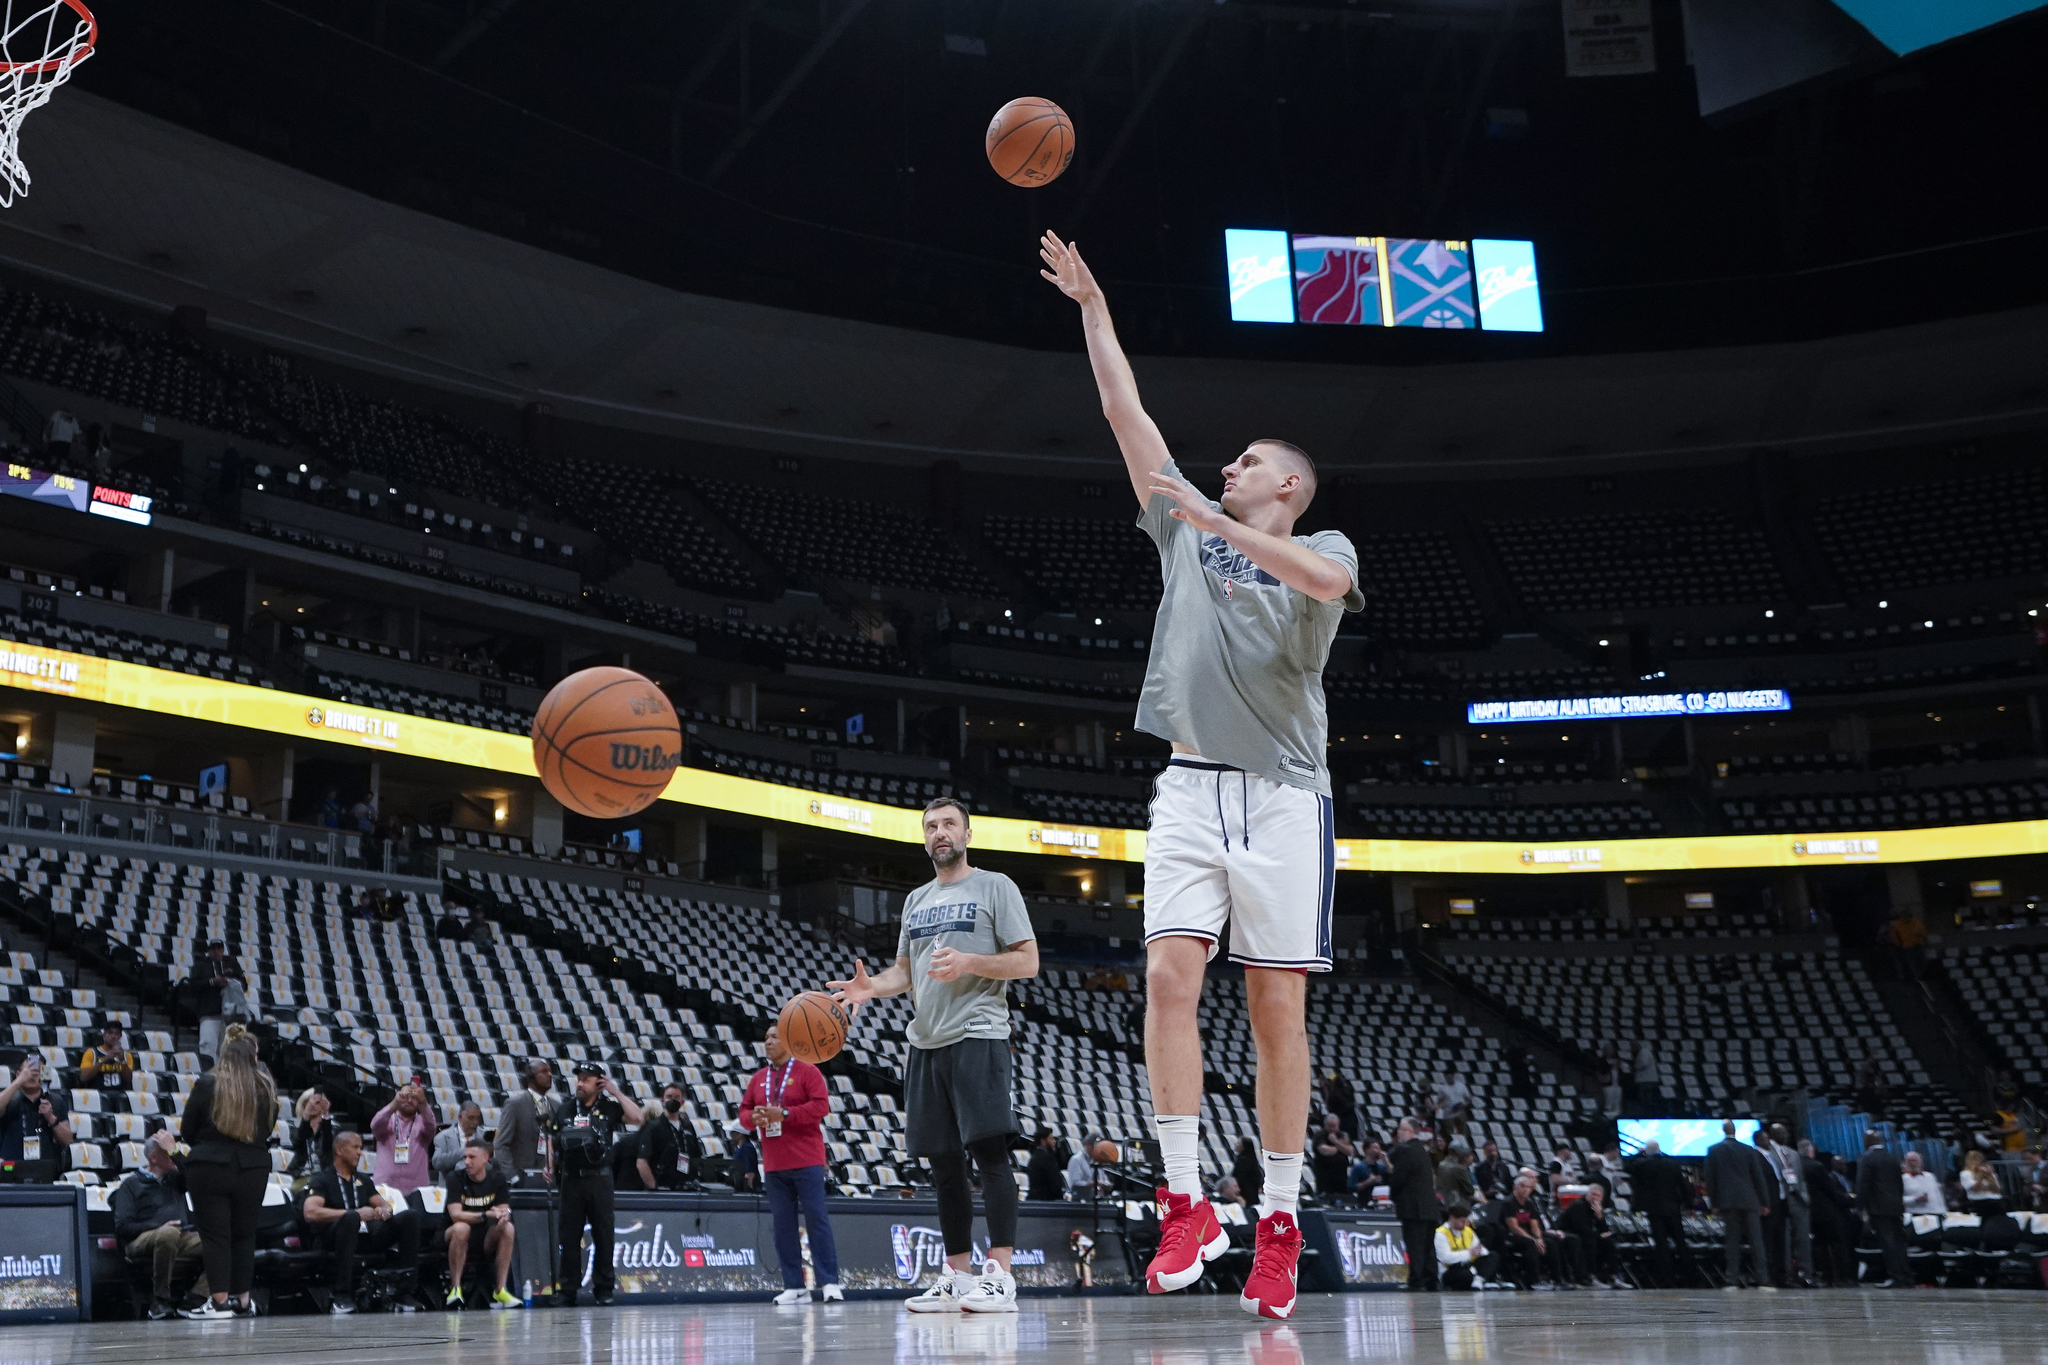  lt;HIT gt;Denver lt;/HIT gt; Nuggets center Nikola Jokic, right, warms up before Game 2 of basketball's NBA Finals against the Miami Heat, Sunday, June 4, 2023, in  lt;HIT gt;Denver lt;/HIT gt;. (AP Photo/Mark J. Terrill)